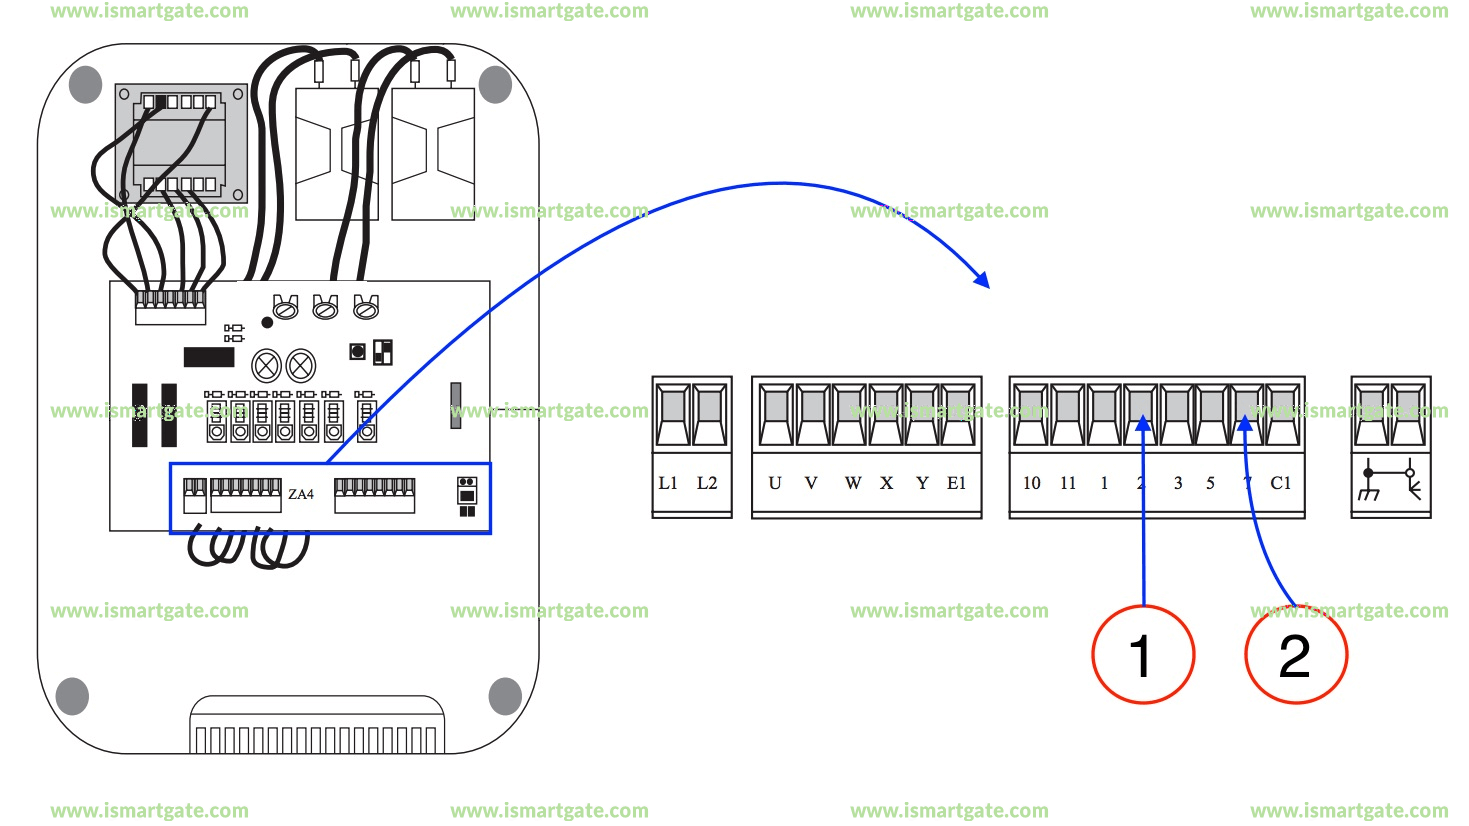 Wiring diagram for CAME KRONO 300